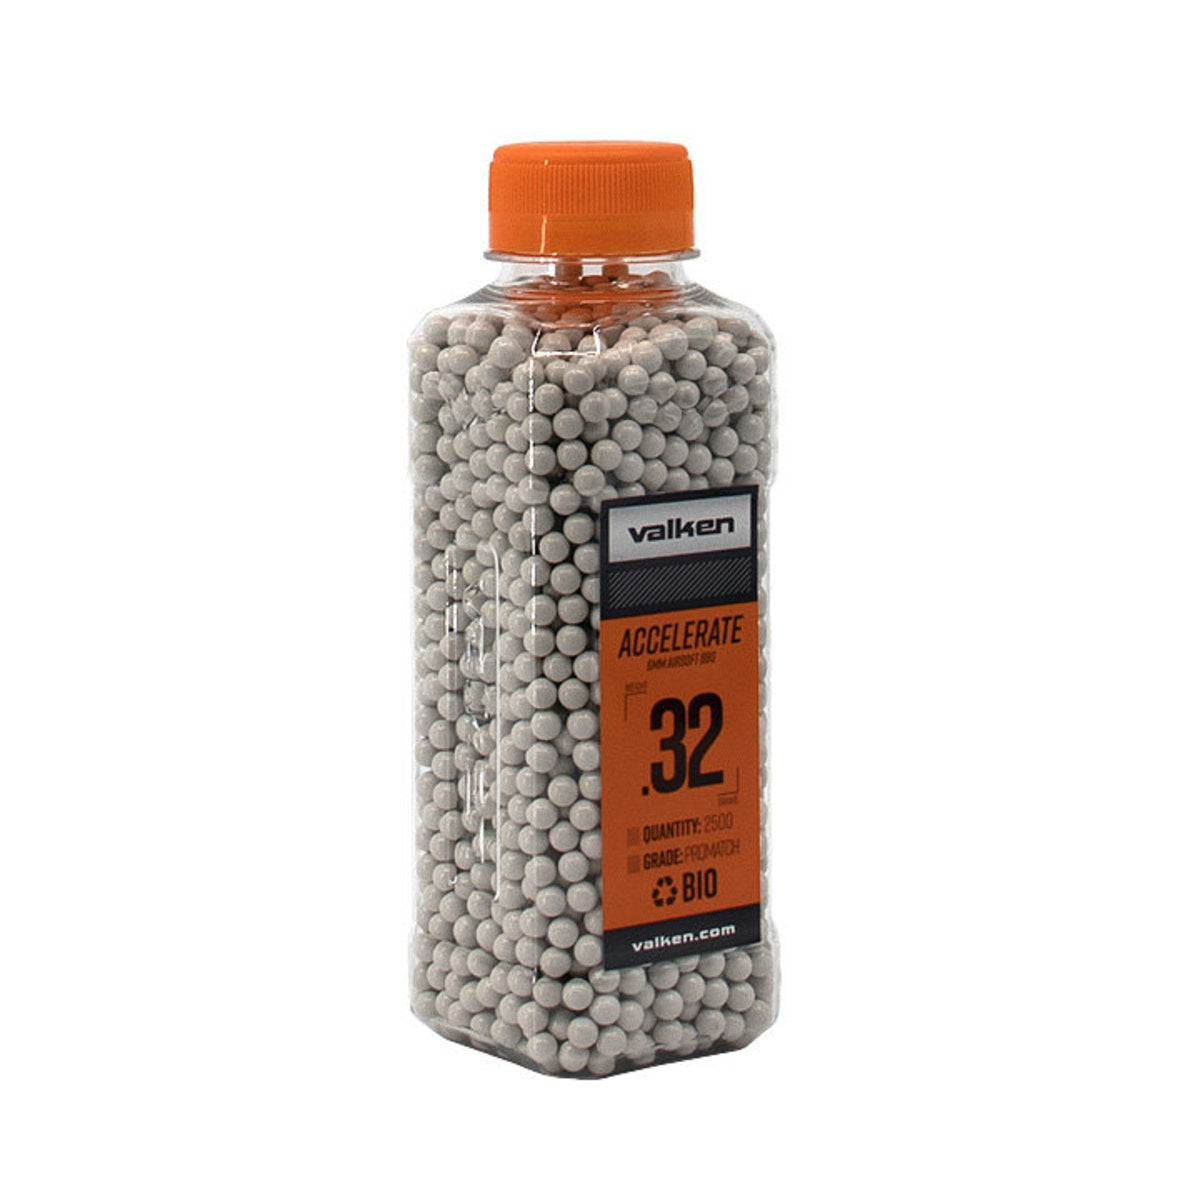 Valken Accelerate Promatch 0.32G 2,500Ct Biodegradable Airsoft Bbs